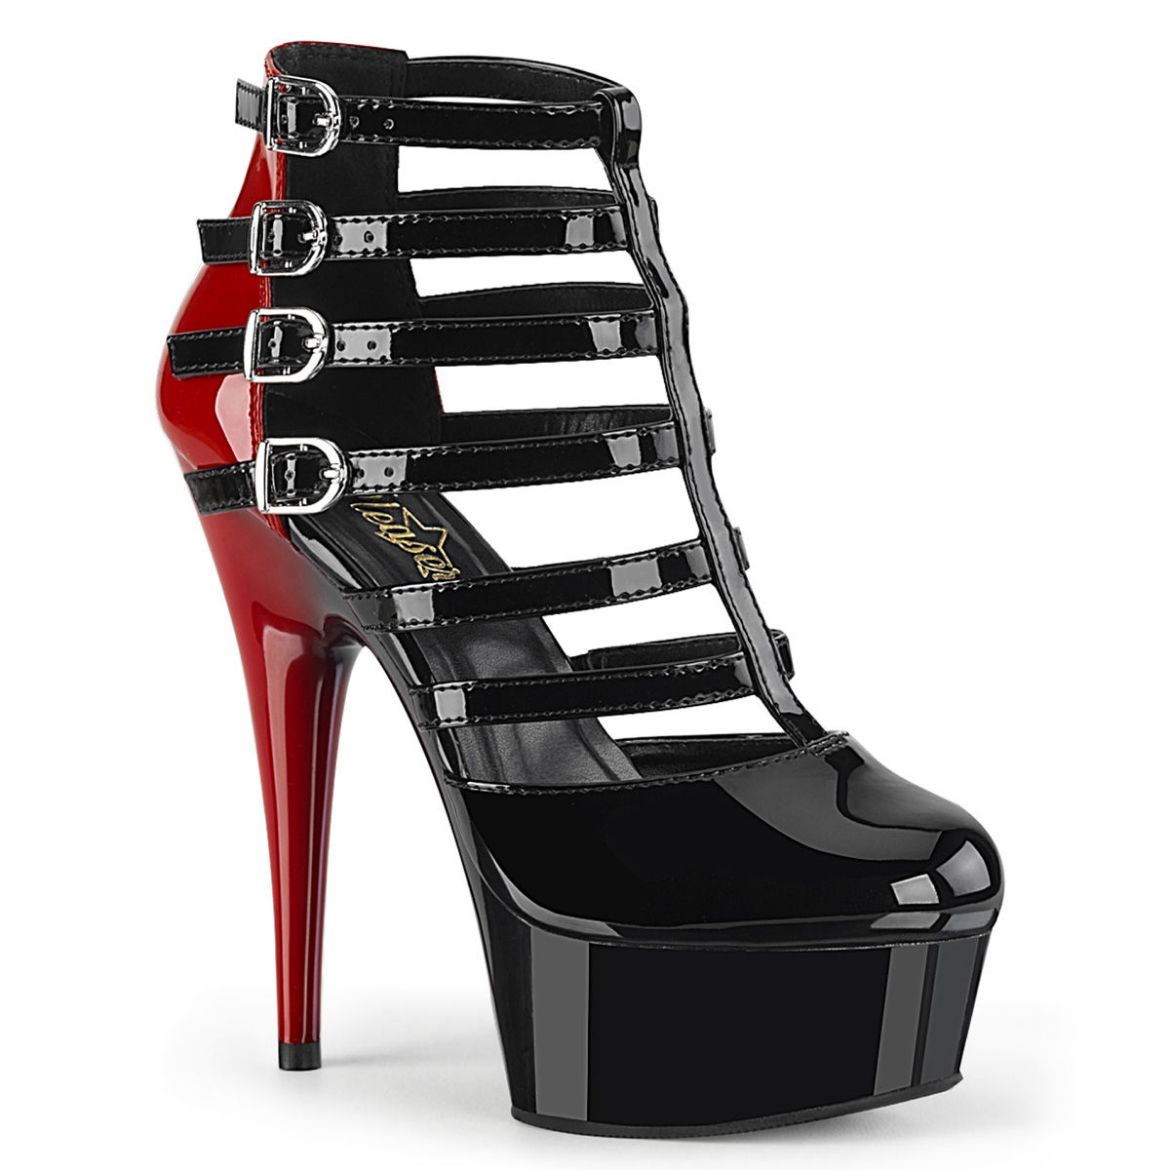 Product image of Pleaser DELIGHT-695 Black-Red Patent/Black 6 inch (15.2 cm) Heel 1 3/4 inch (4.5 cm) Platform Two Tone Buckles Strappy Cage Bootie